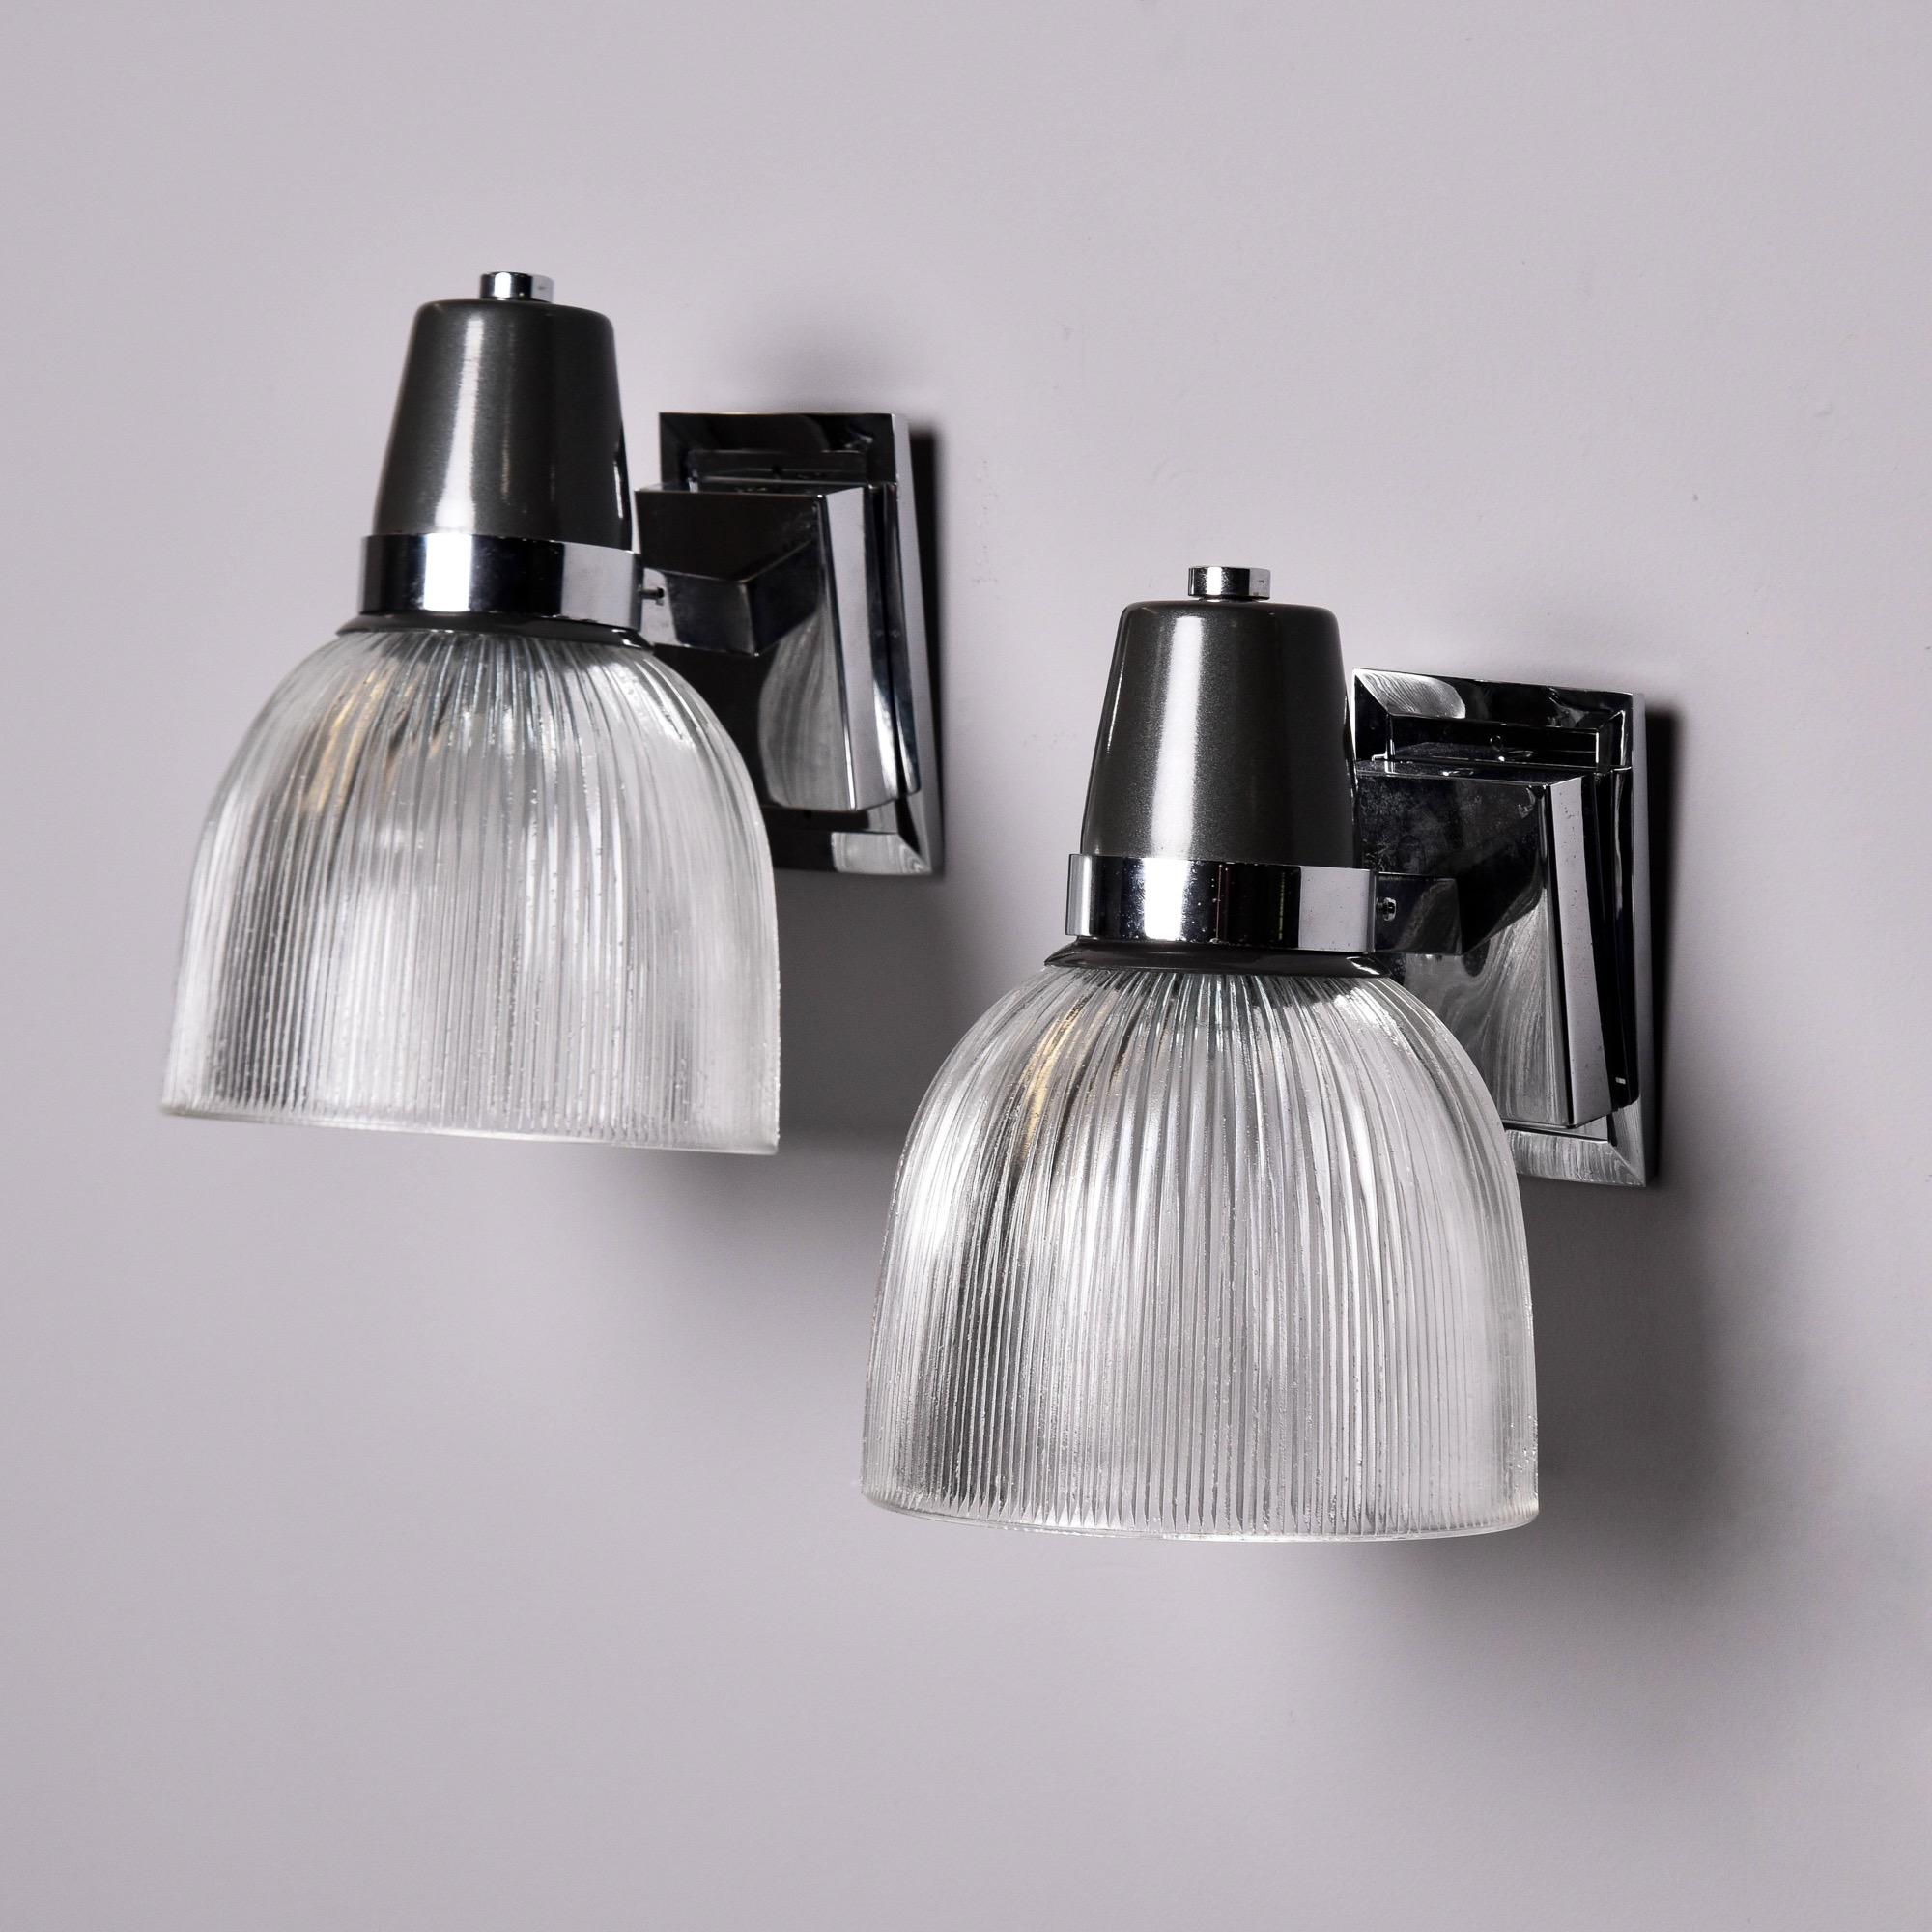 Found in England, this pair of industrial style sconces date from the late 1970s. Each light has a rectangular chrome backplate, chrome and black fittings and clear, ridged glass shades. Each has a single socket that has been rewired for US